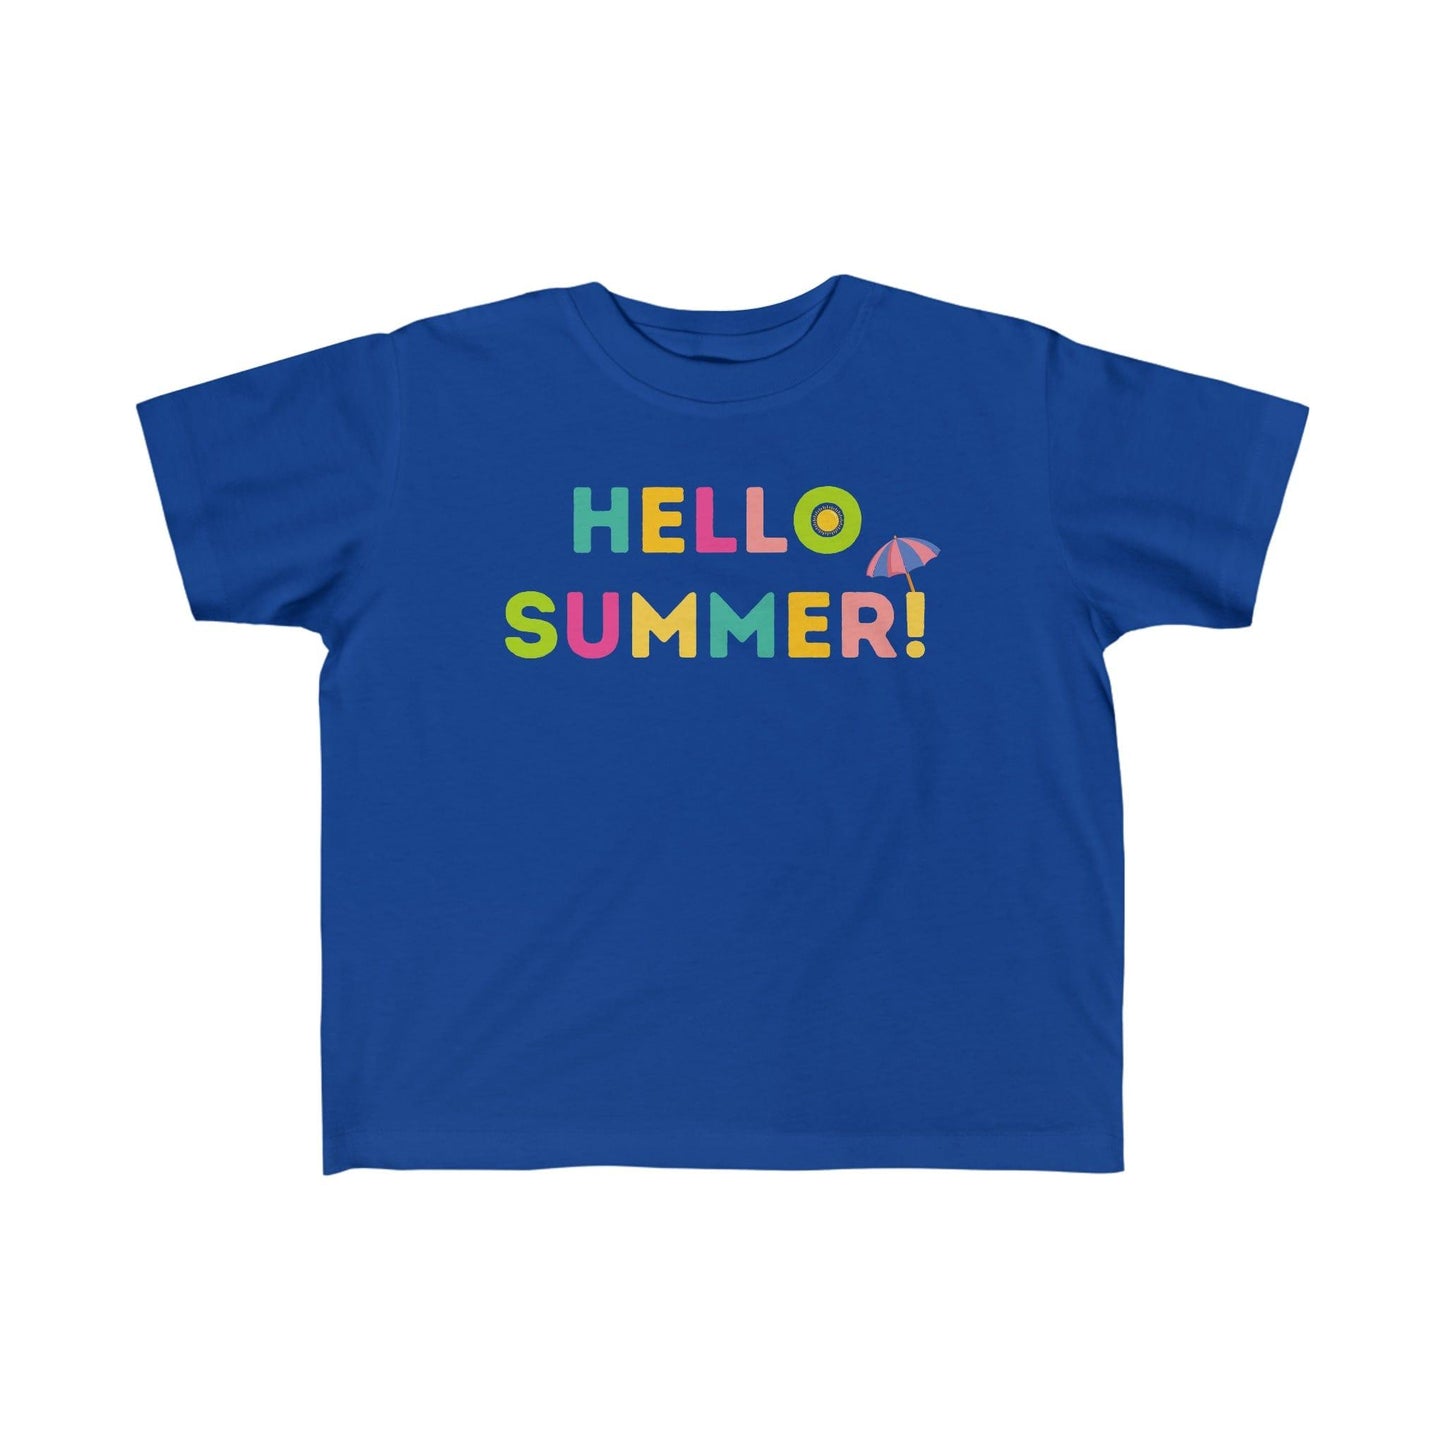 Toddler's Hello Summer Tee, Summer shirt for toddlers birthday gift Kids